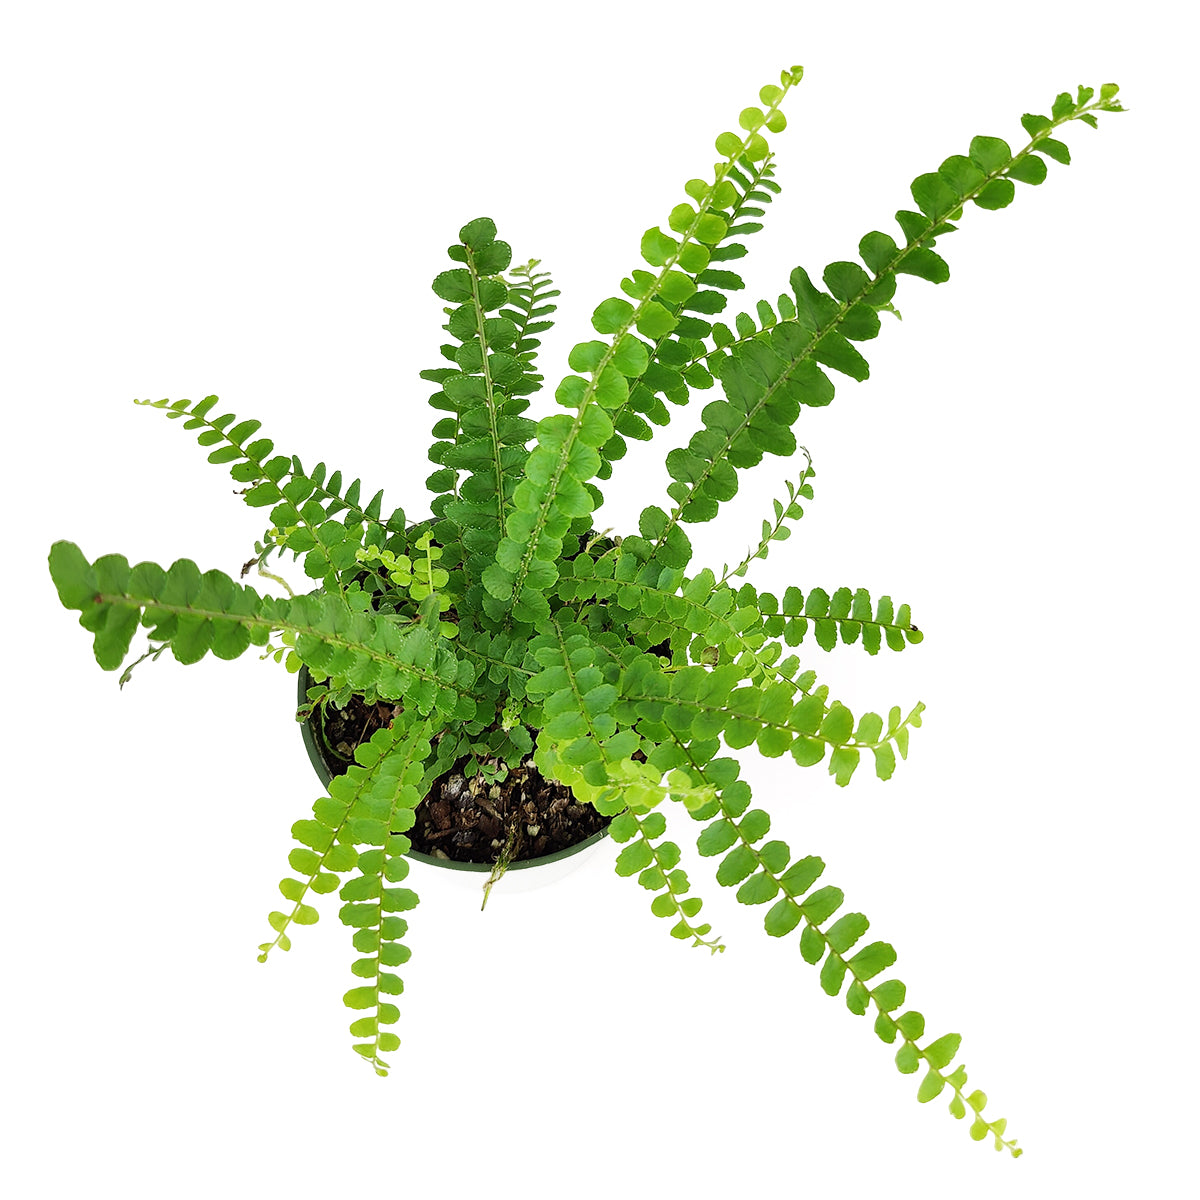 Lemon Button Fern, Fern Plant, How to Care for Lemon Button Fern, Easy Care Houseplants, Indoor Houseplants